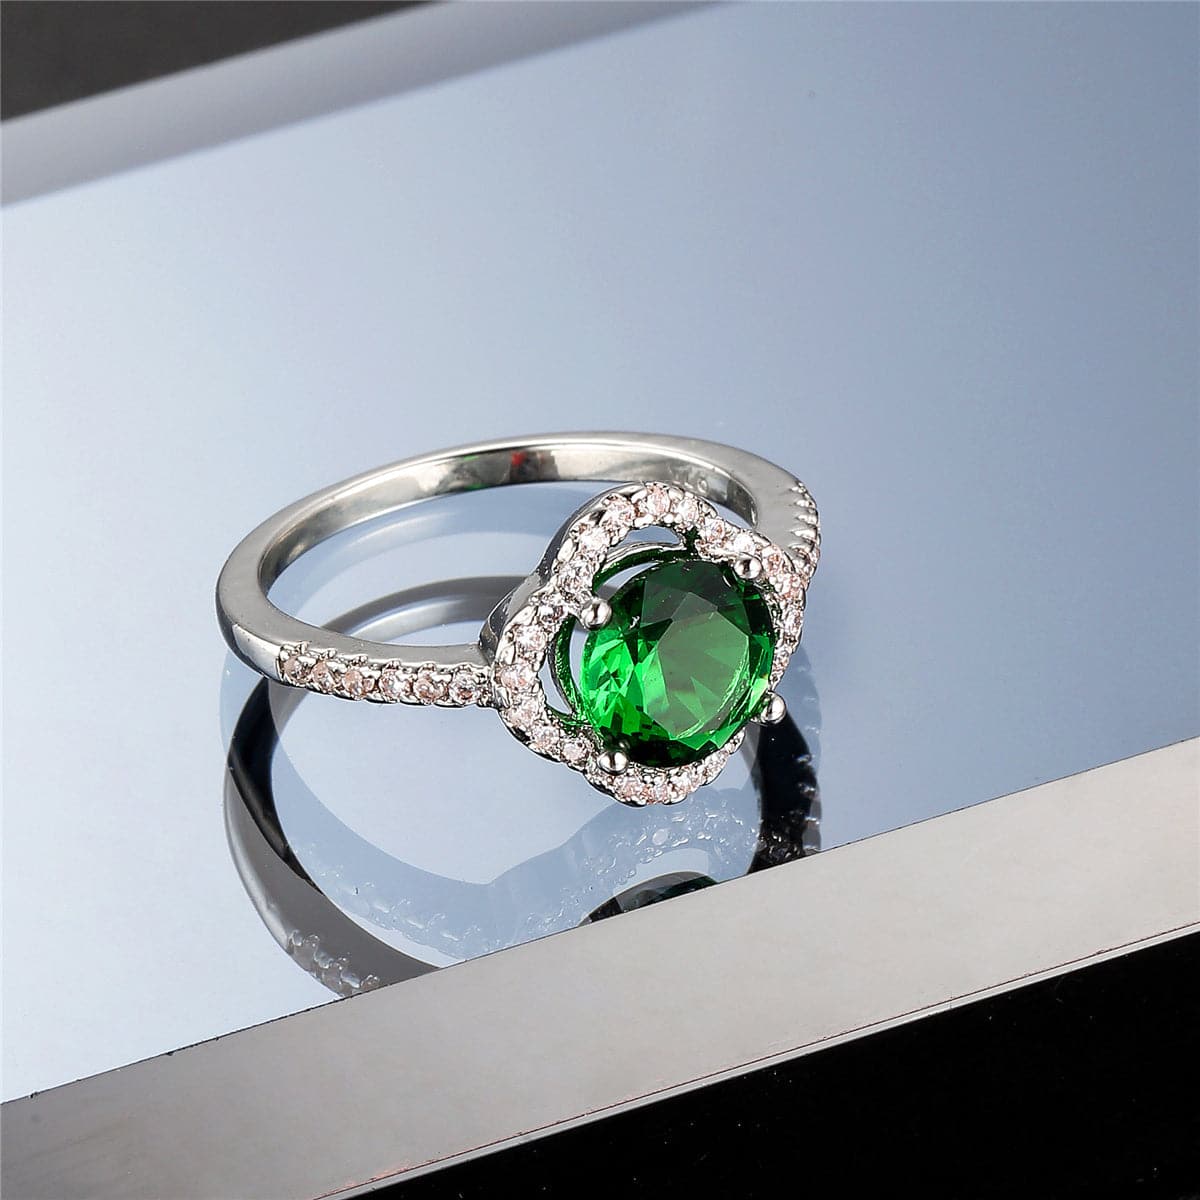 Green Cubic Zirconia & Crystal Clover Halo Round Ring